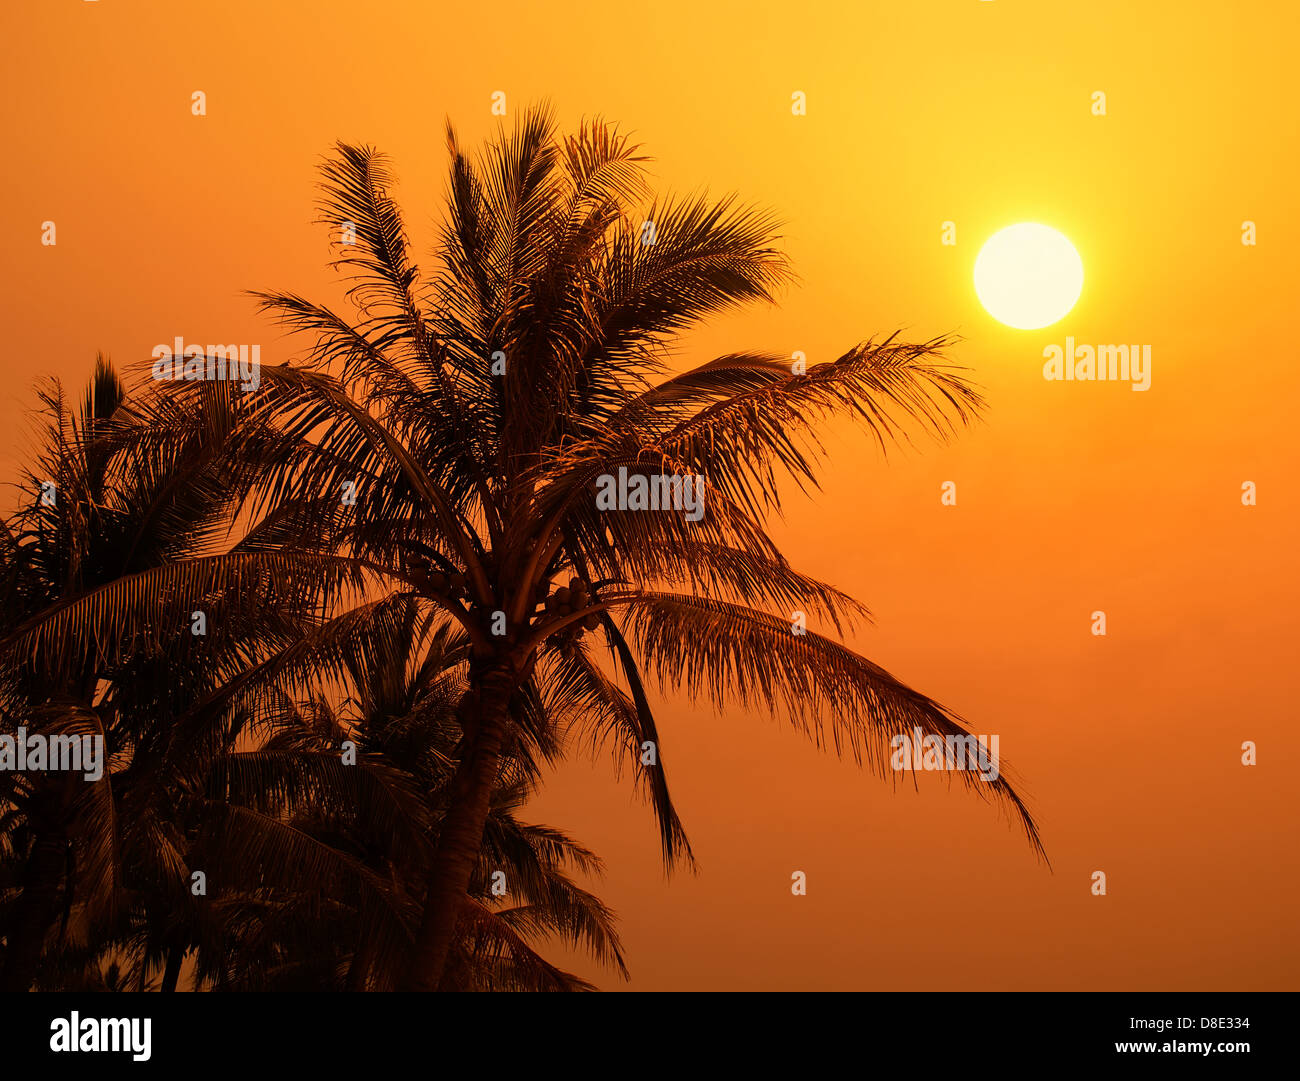 palms on sand beach in tropic on sunset Stock Photo